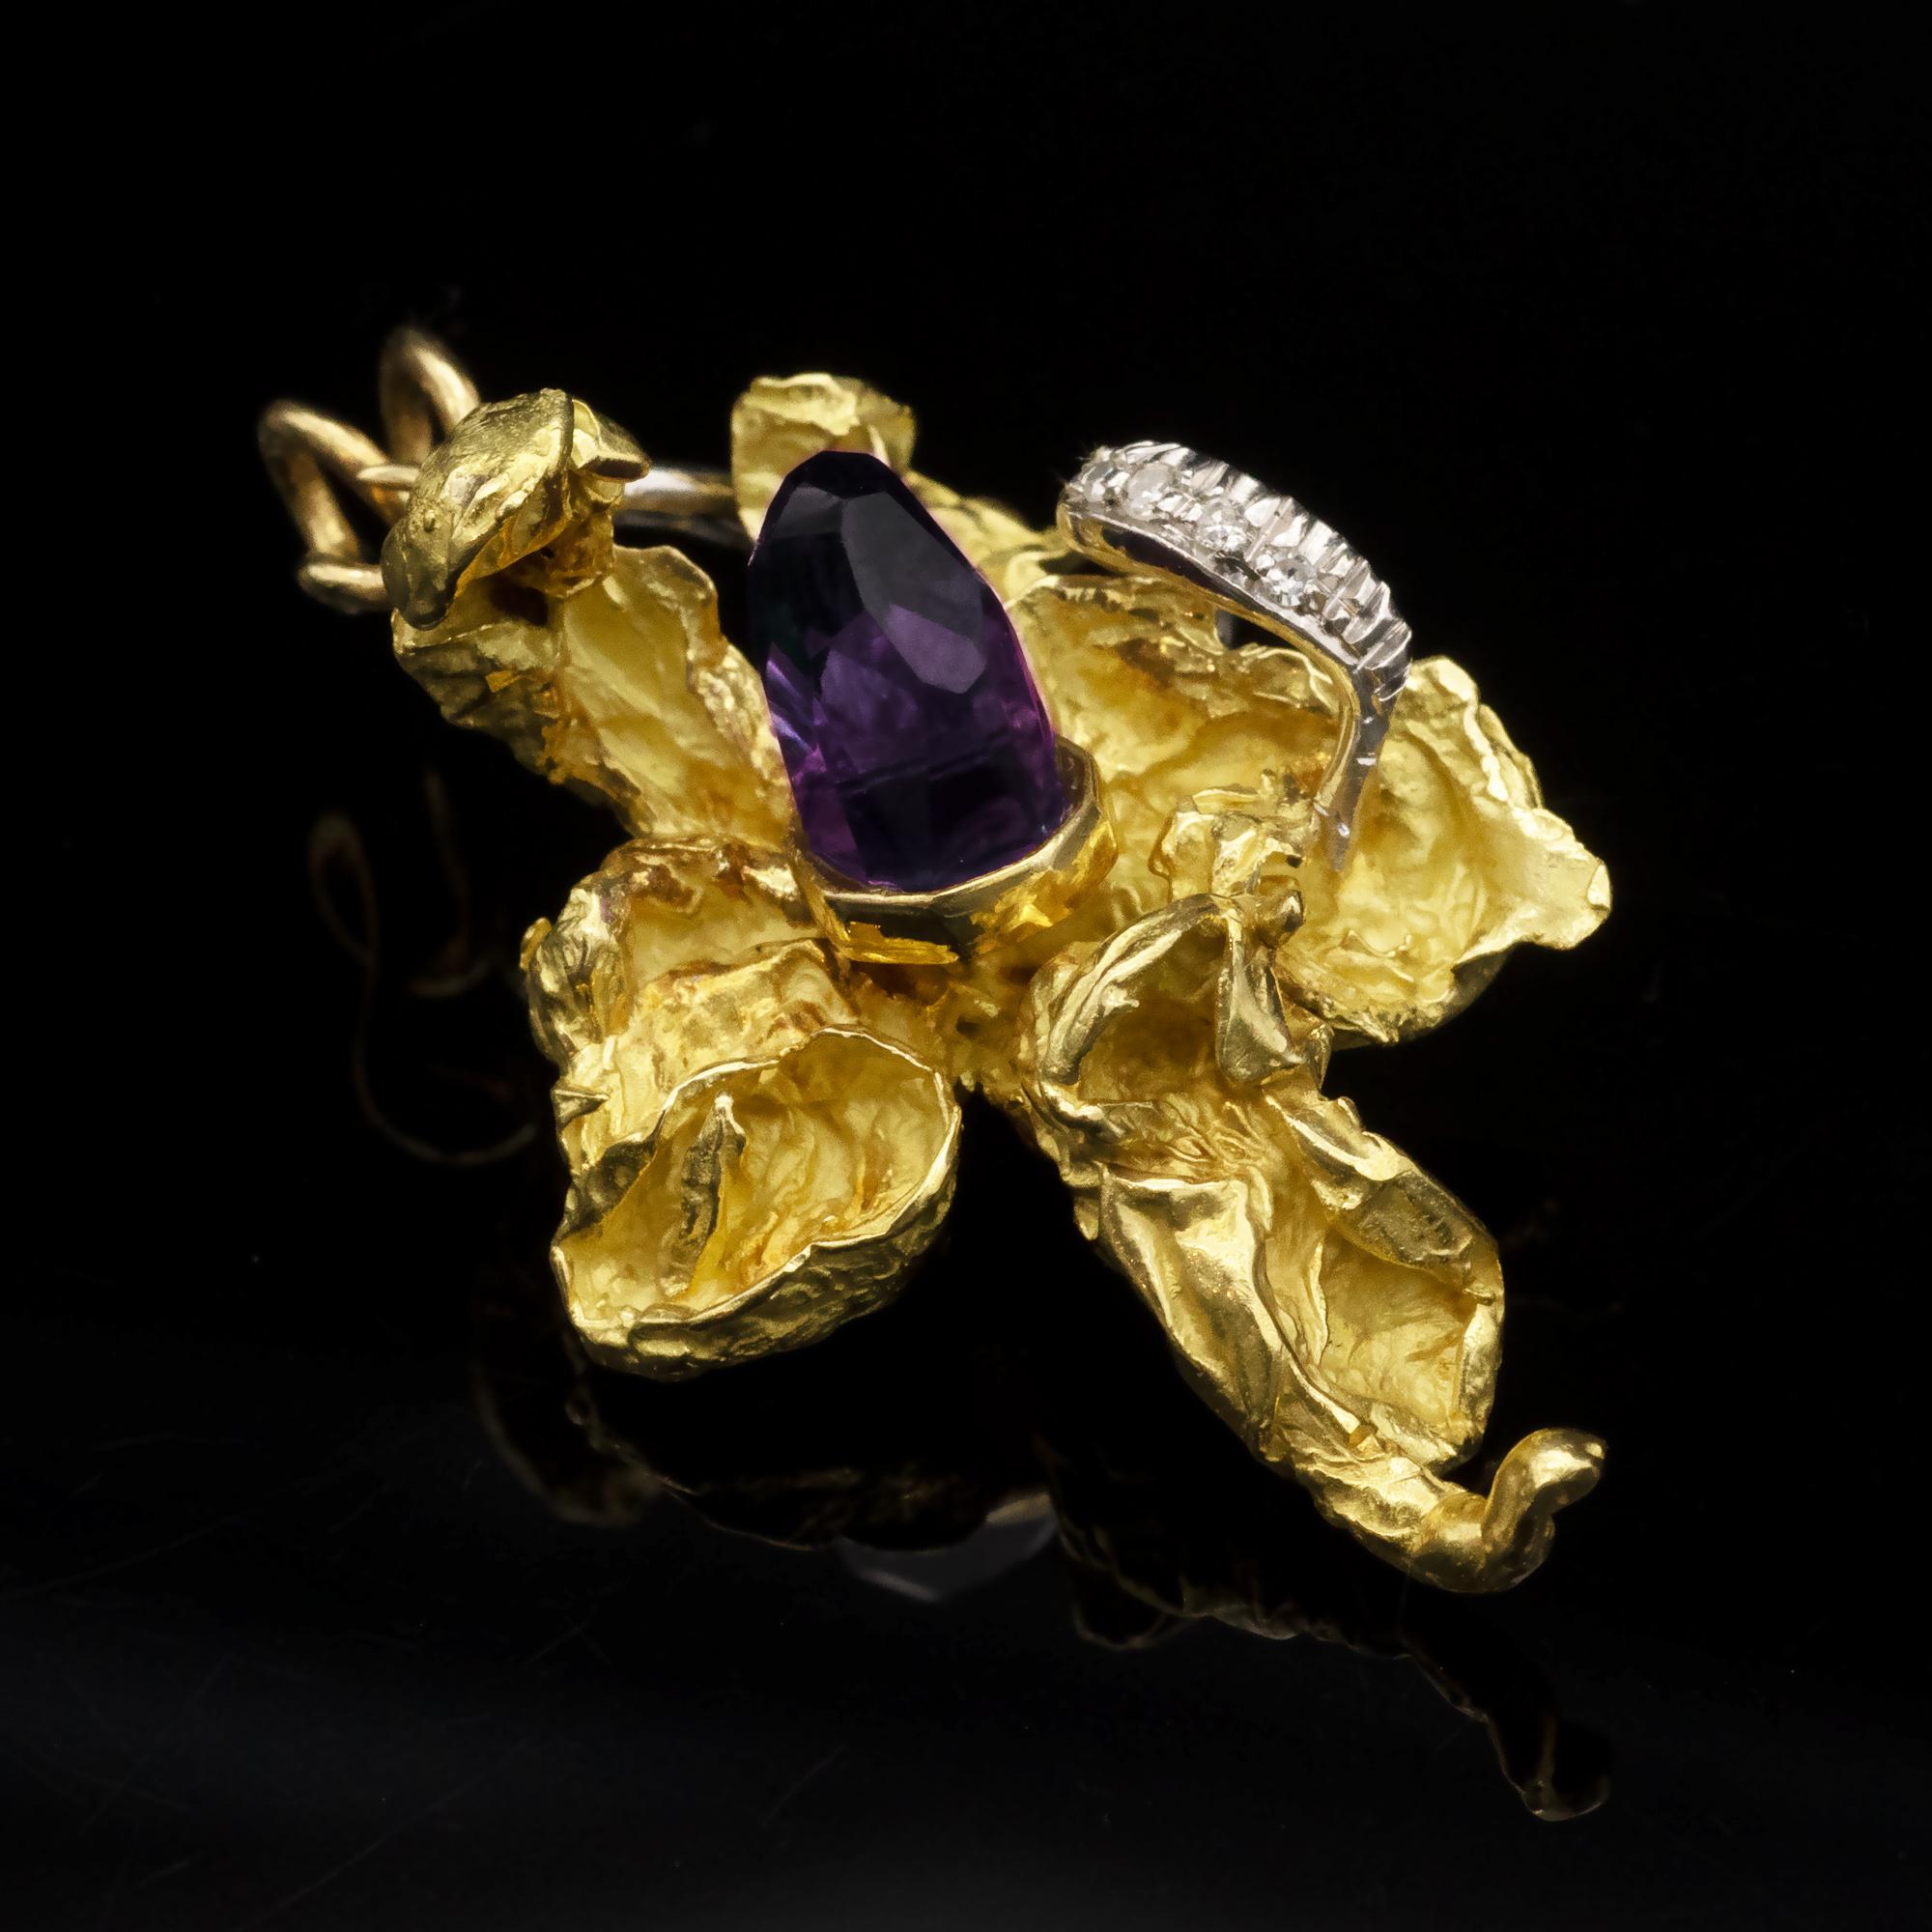 Modernist 18 karat gold Orchid Pendant. The craft reminds of Grima style in solid, nugget like, gold. An Amethyst polished crystal is set in its center while diamond set white gold 